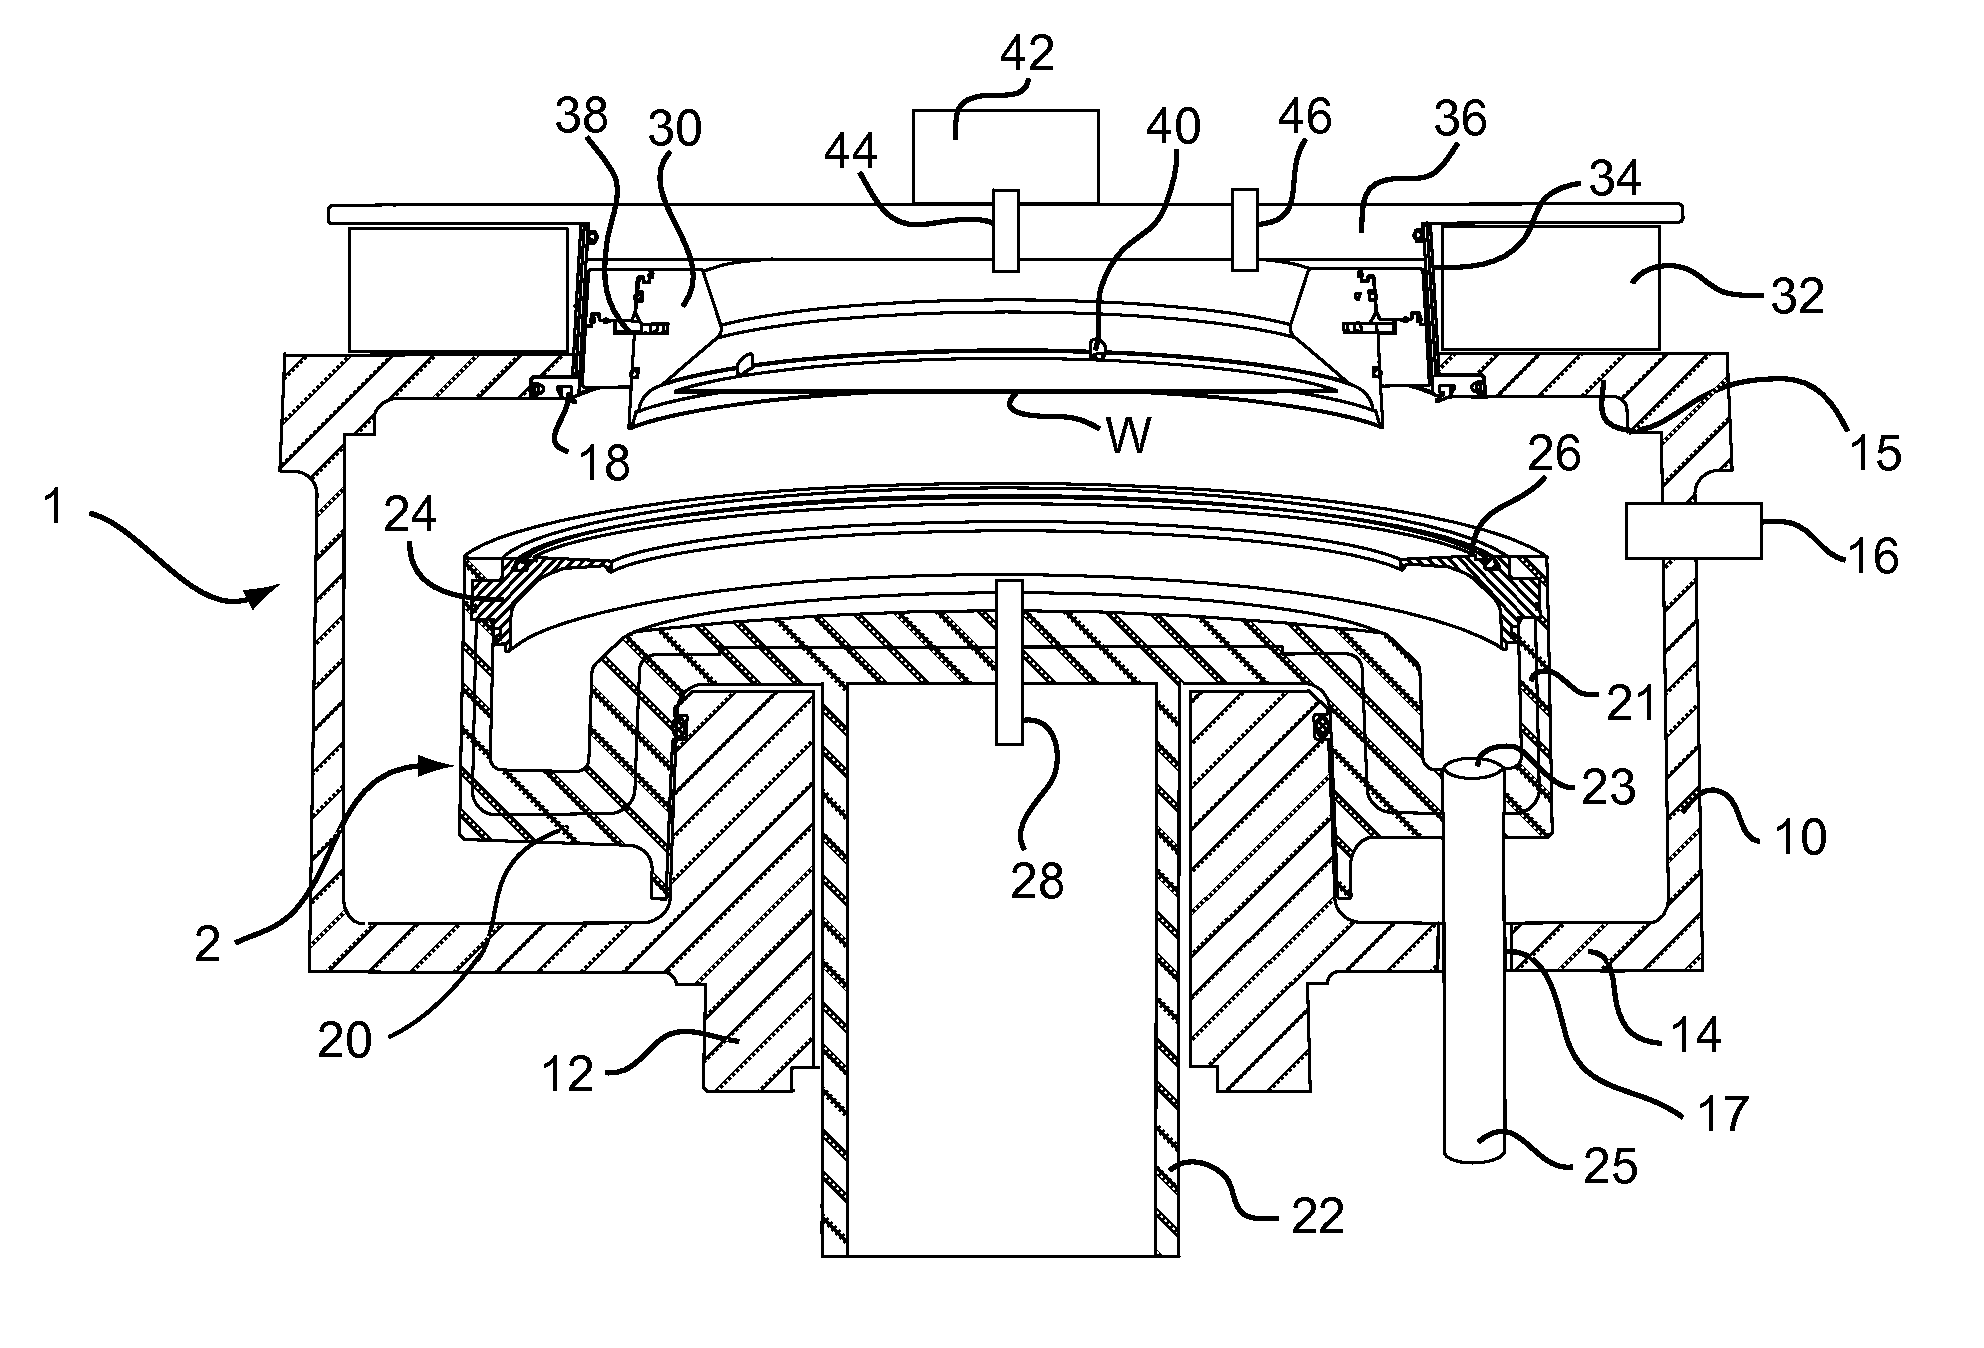 Apparatus for treating surfaces of wafer-shaped articles